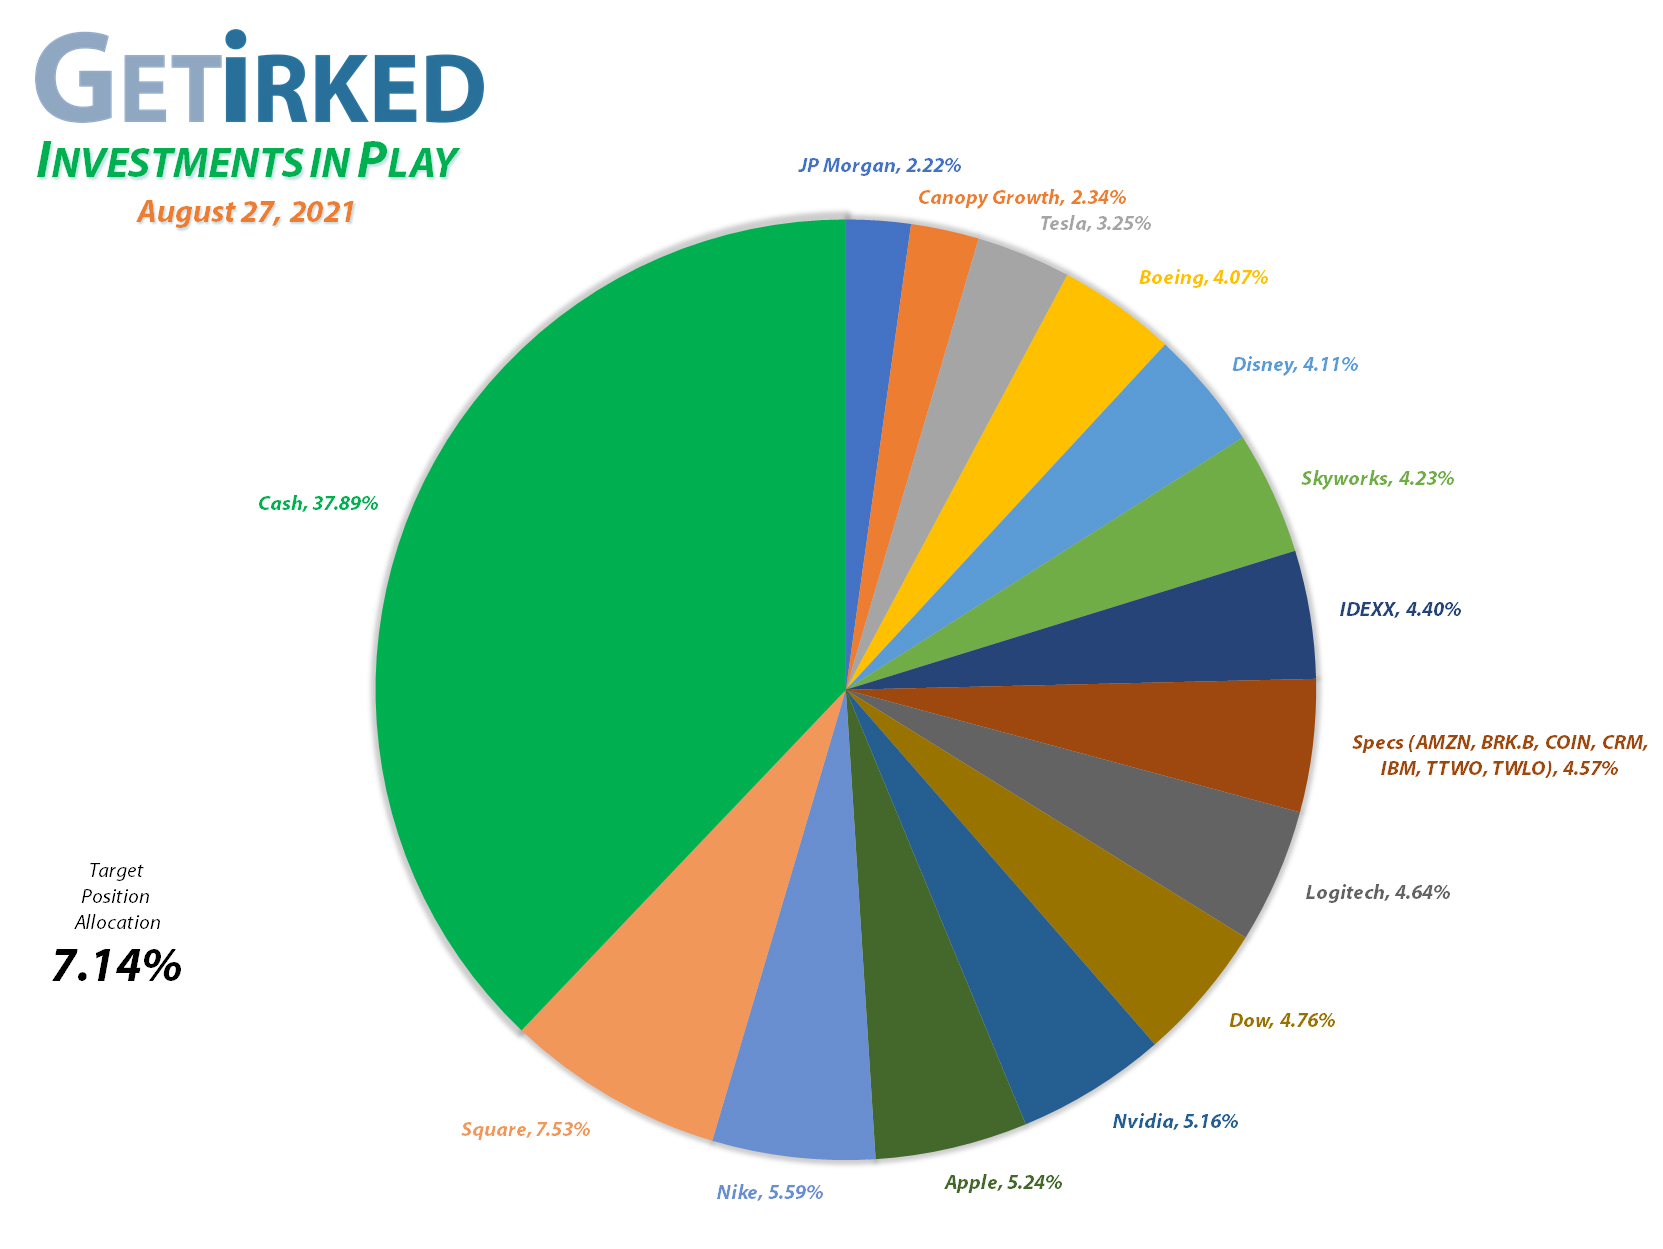 Get Irked - Investments in Play - Current Holdings - March 12, 2021et Irked's Pandemic Portfolio Holdings as of August 27, 2021